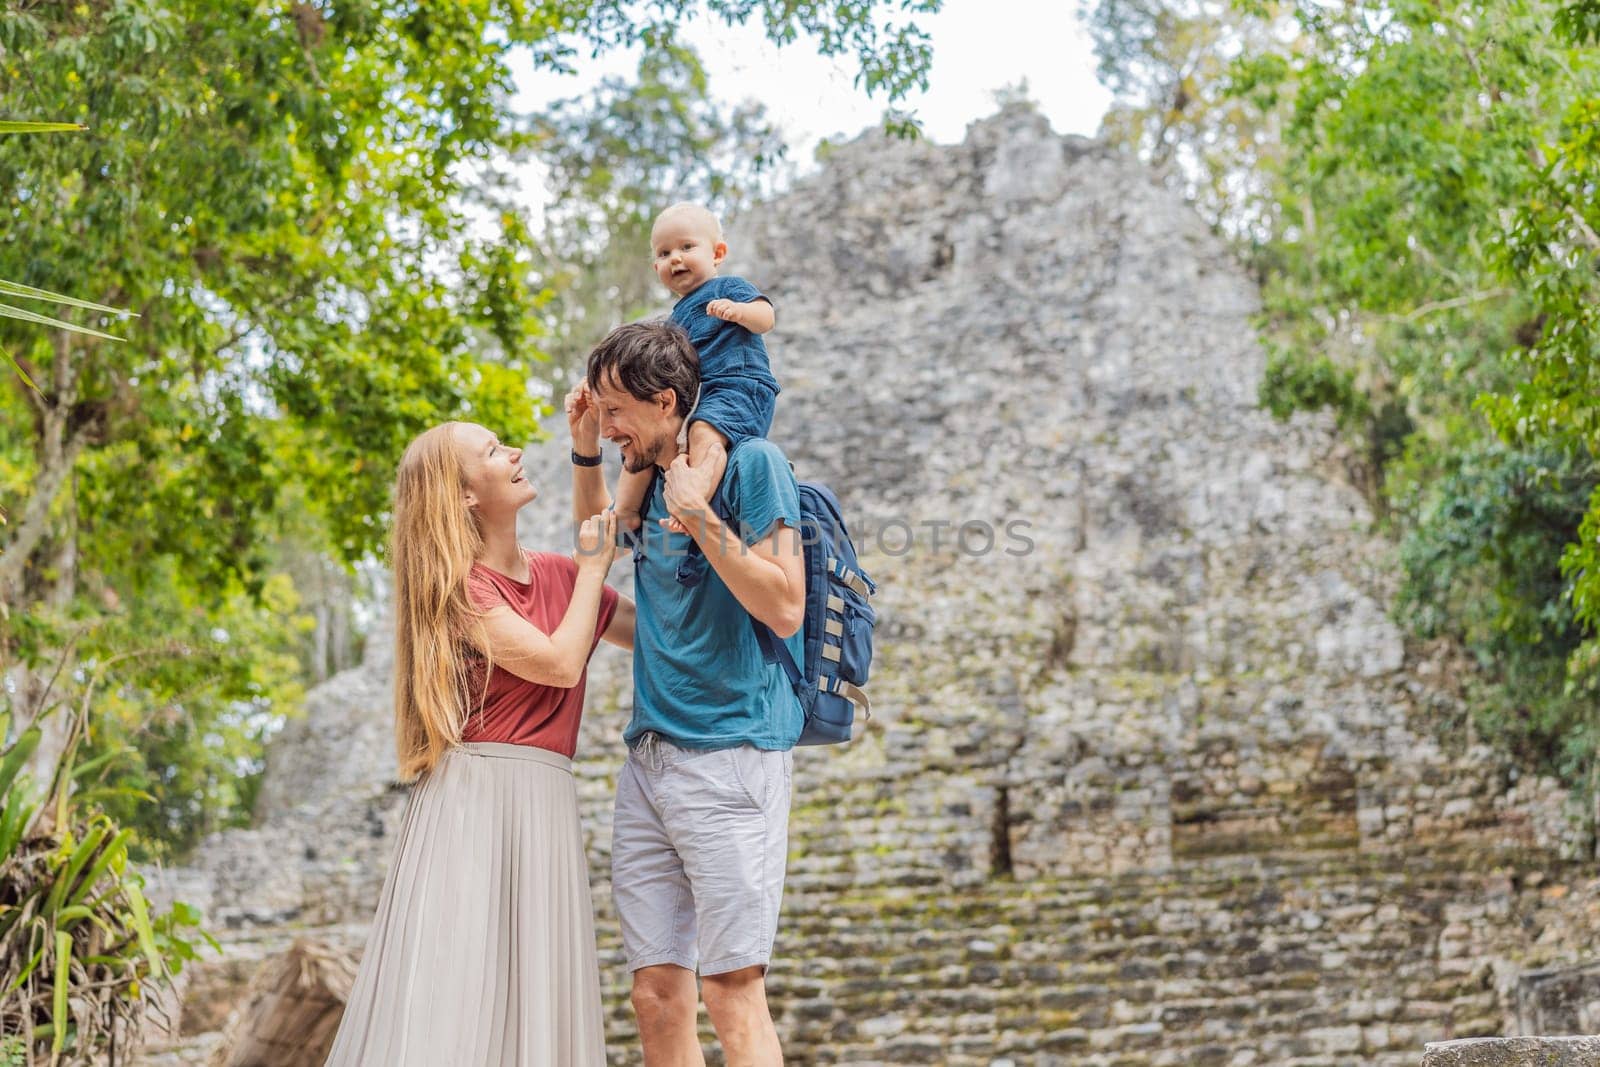 Mom, dad and baby tourists at Coba, Mexico. Ancient mayan city in Mexico. Coba is an archaeological area and a famous landmark of Yucatan Peninsula. Cloudy sky over a pyramid in Mexico by galitskaya